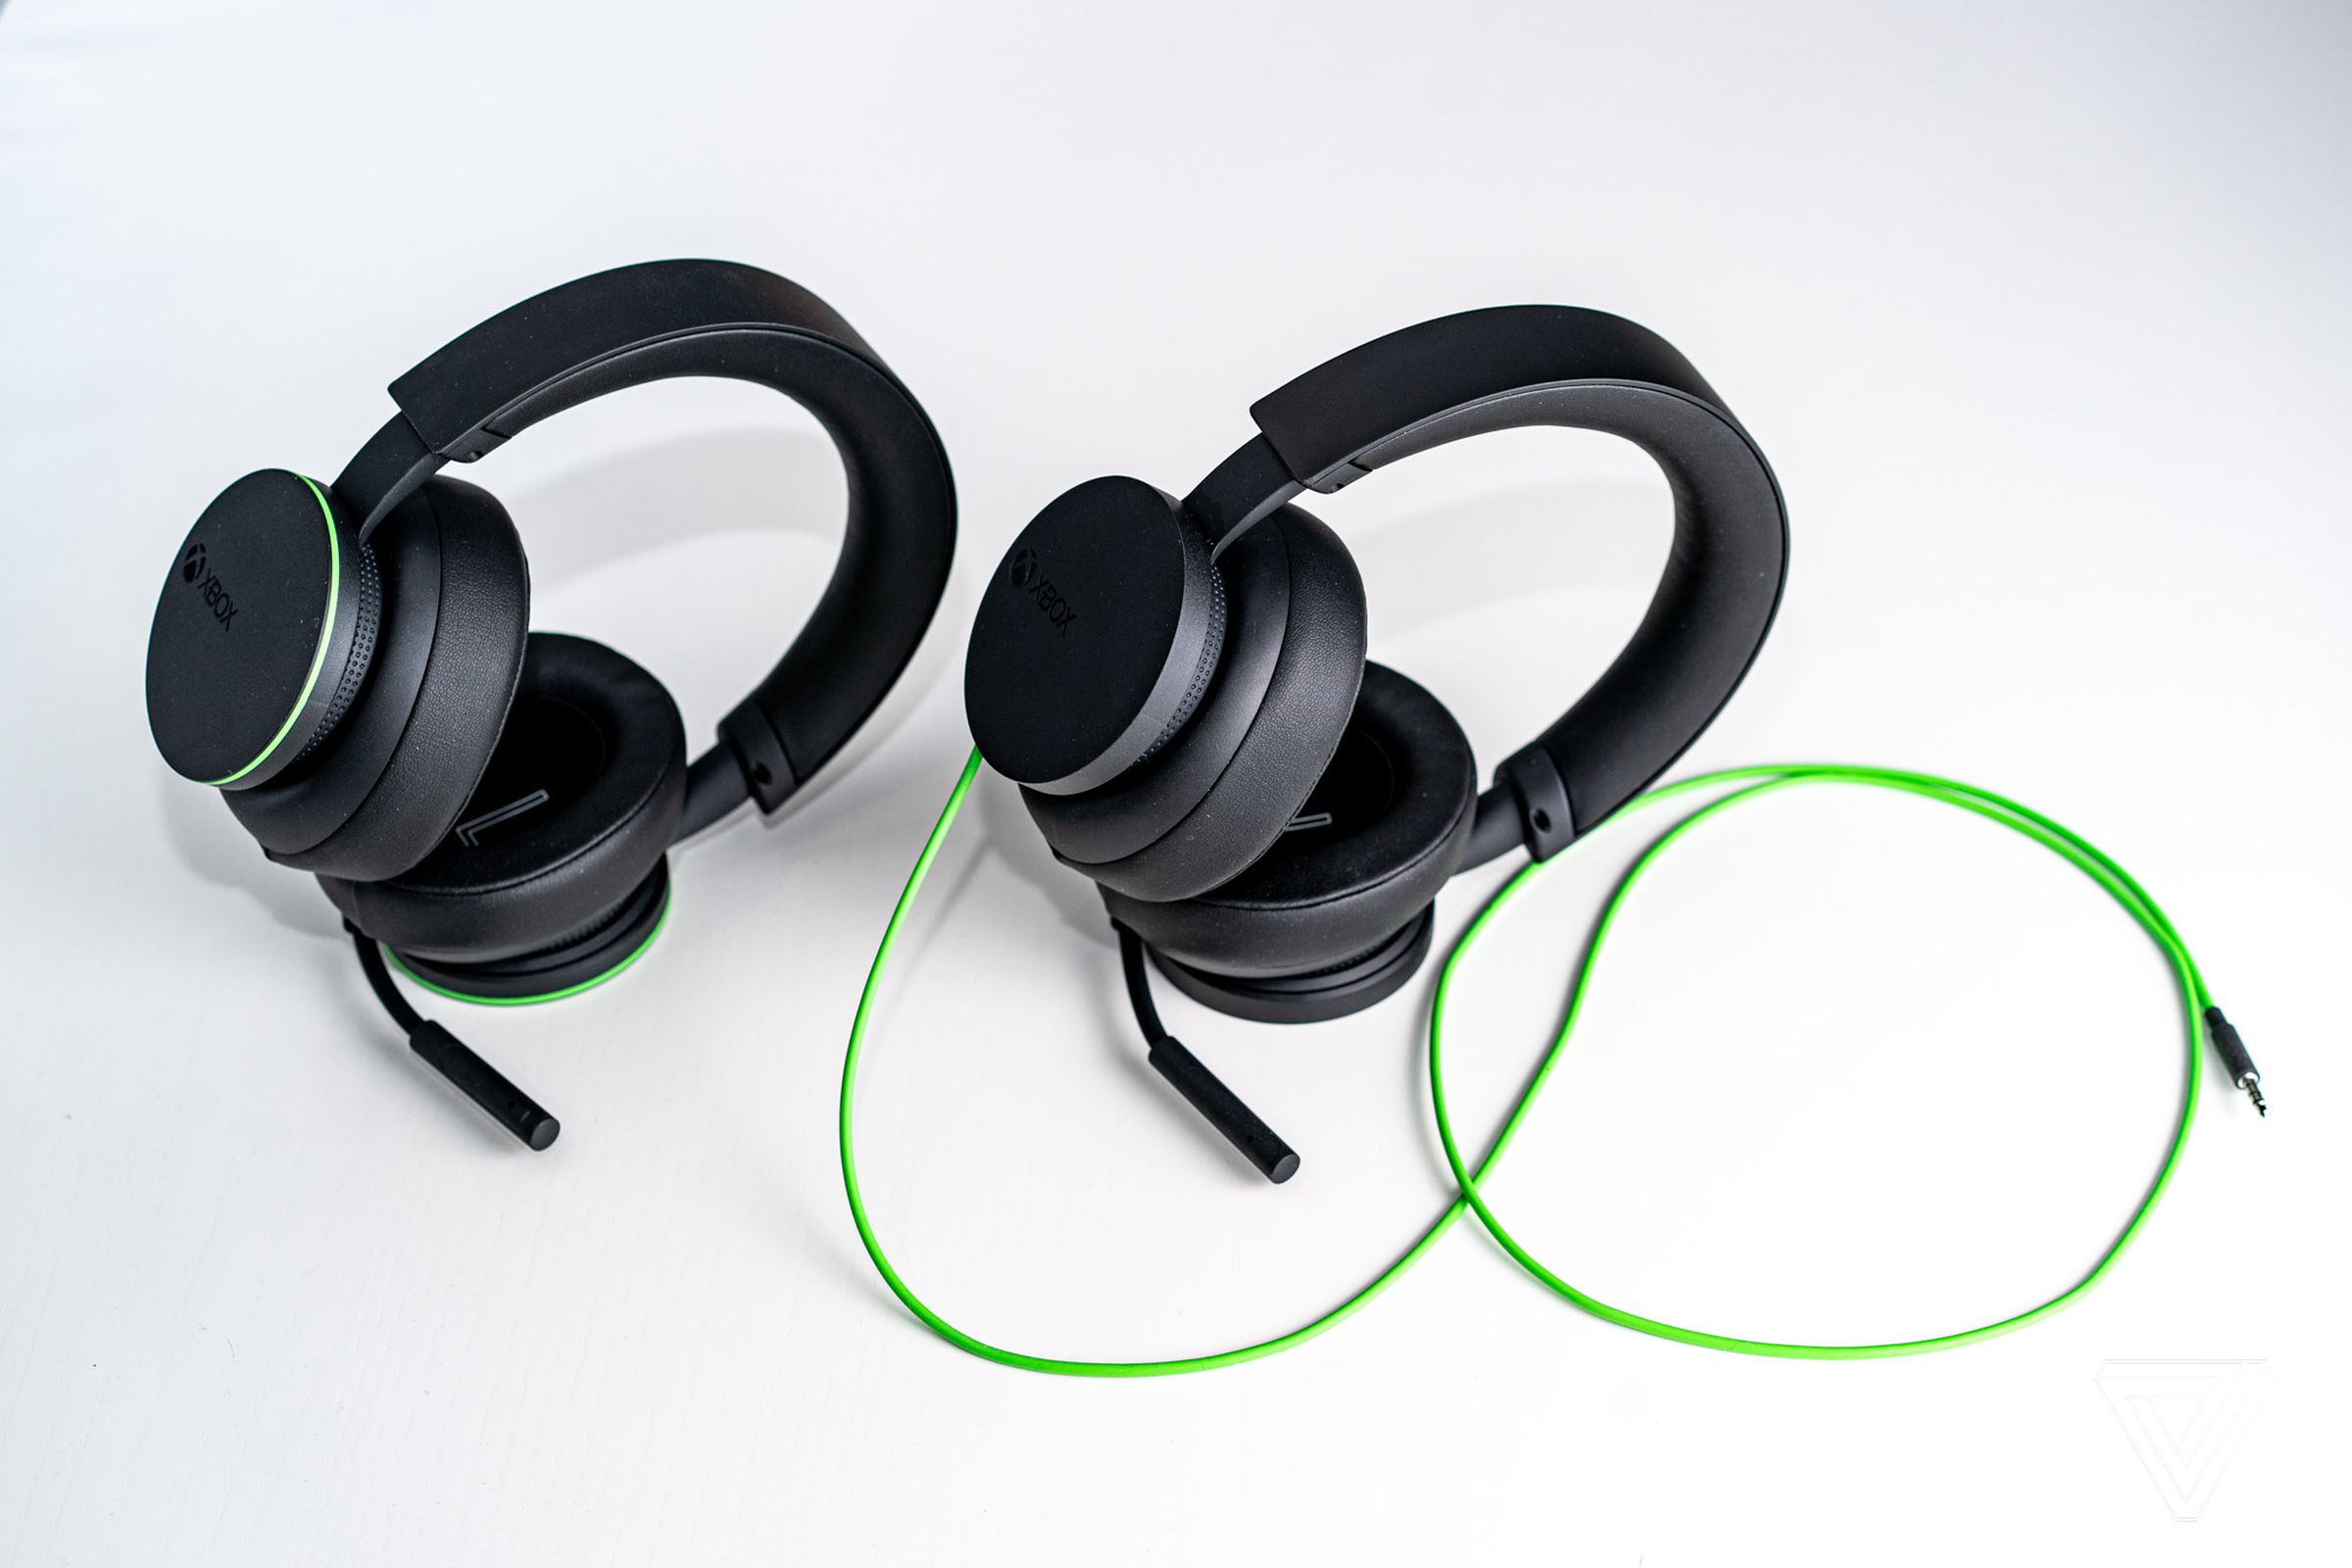 Side-by-side comparison of the Xbox Wireless Headset (left) and Xbox Stereo Headset (right).